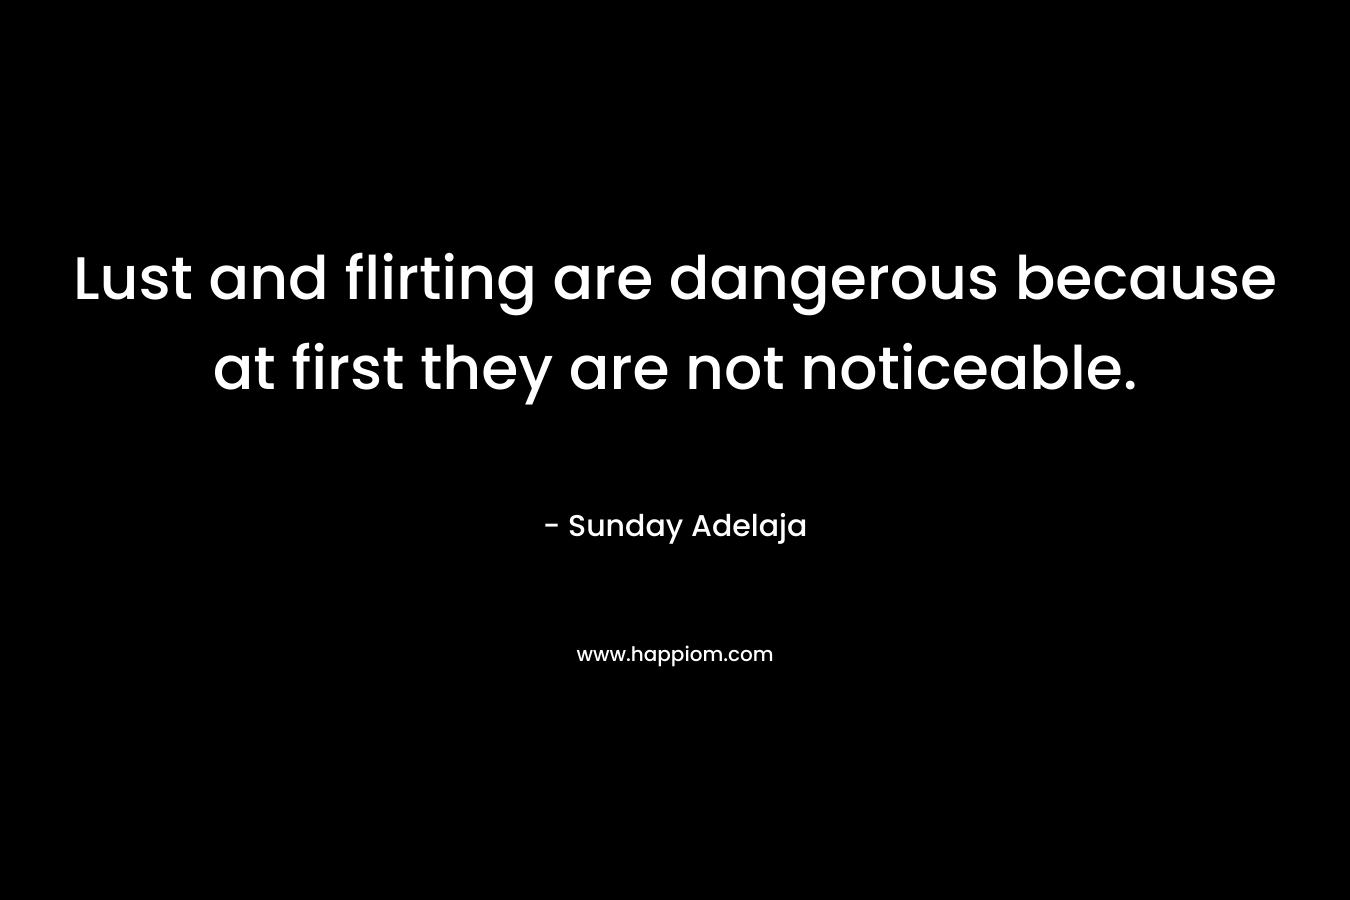 Lust and flirting are dangerous because at first they are not noticeable.